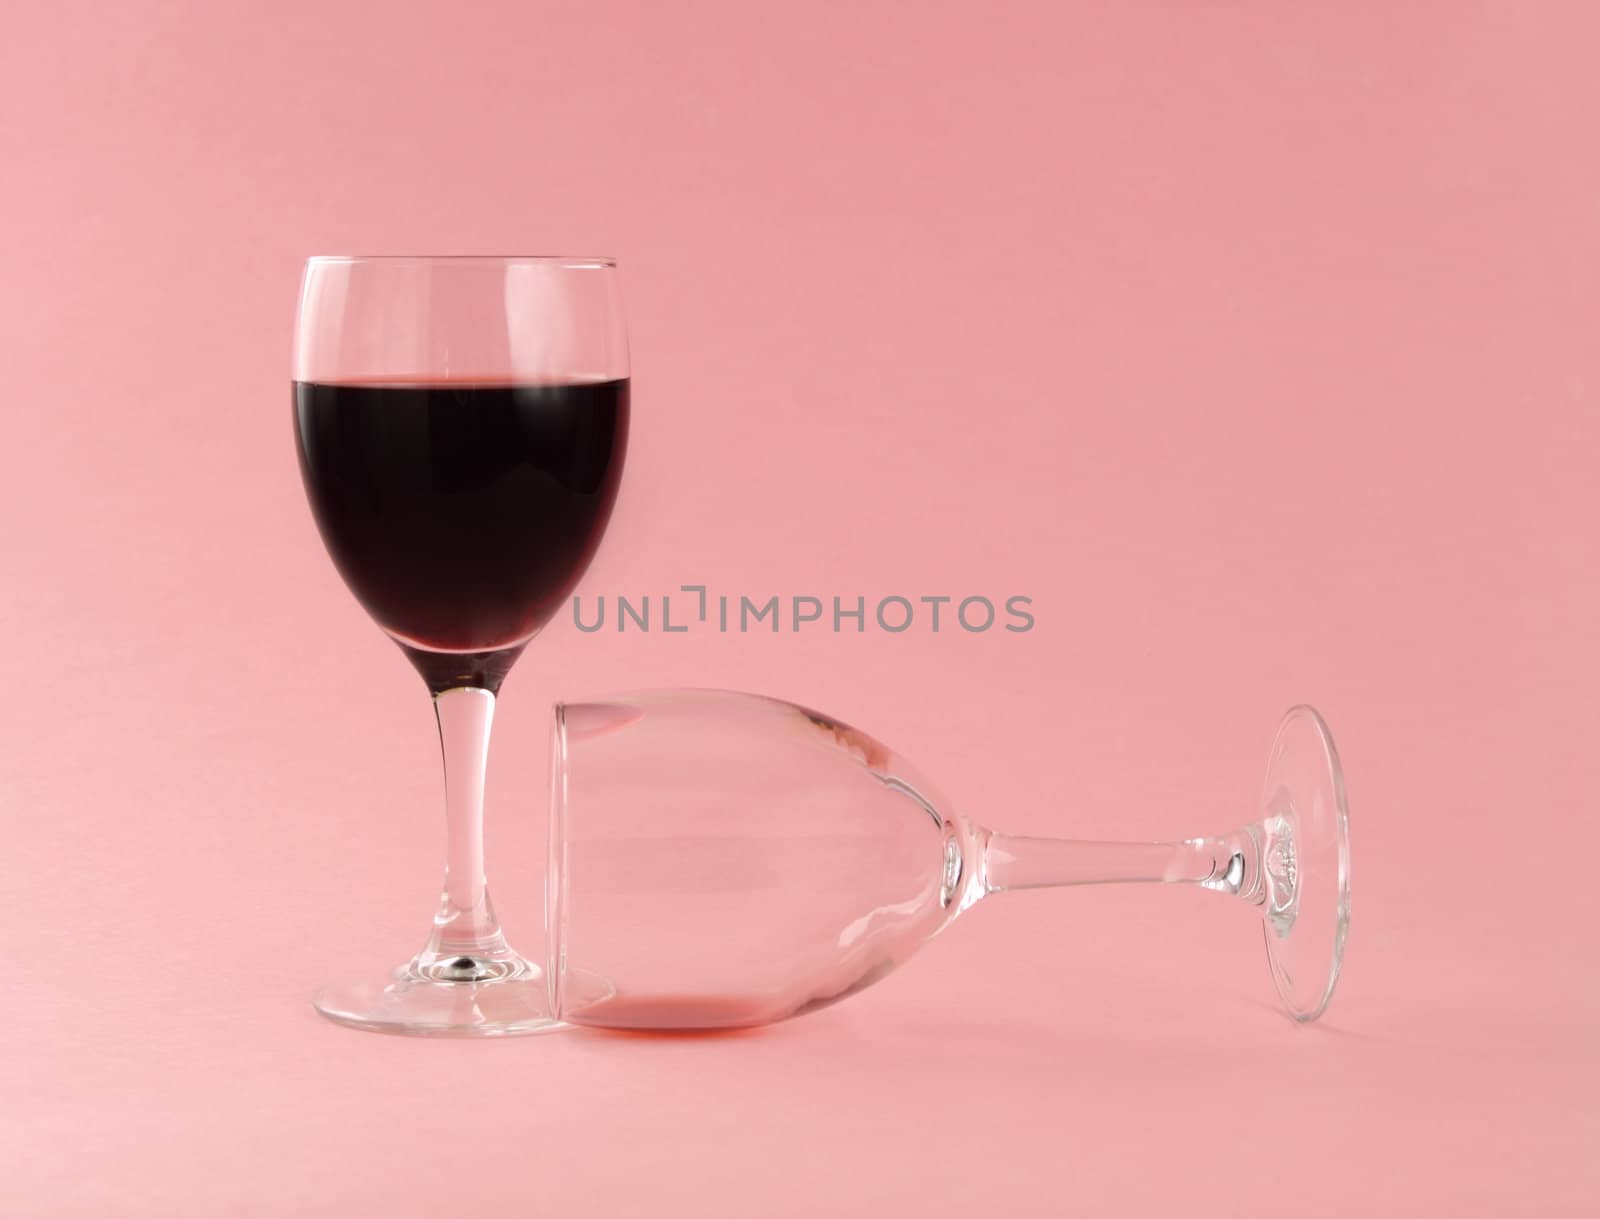 two red wine glasses, filled and empty